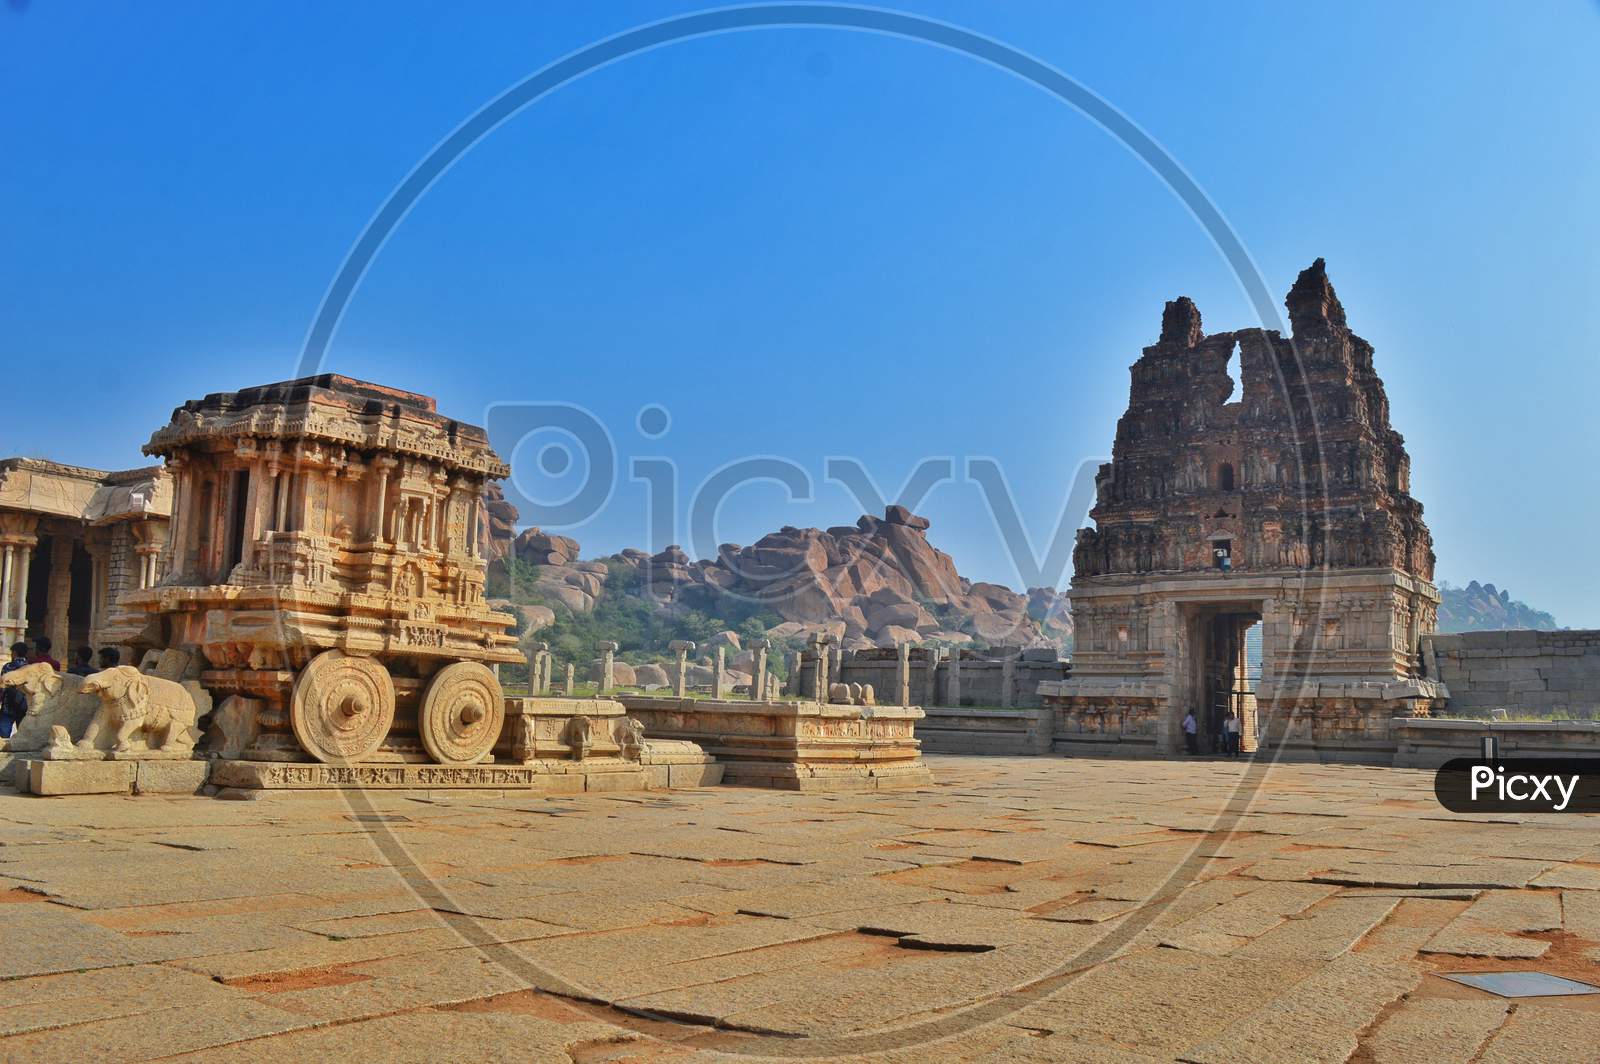 The famous Stone Chariott in Vitthala Temple at Hampi